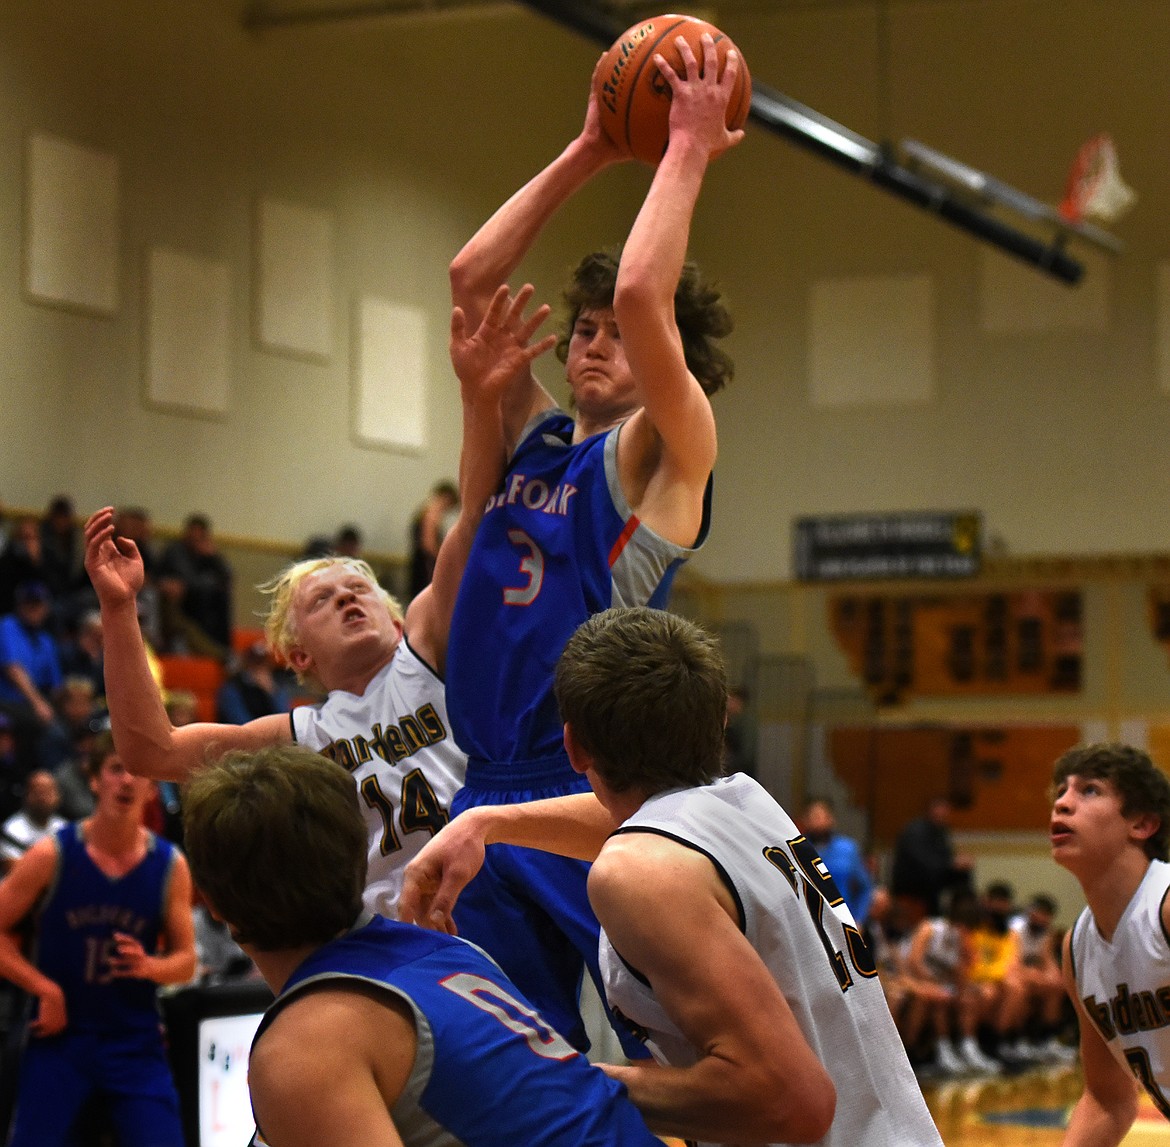 The Vikings battled it out on the court during the Western B Divisional Basketball Tournament in Eureka last weekend.
Jeremy Weber/Bigfork Eagle